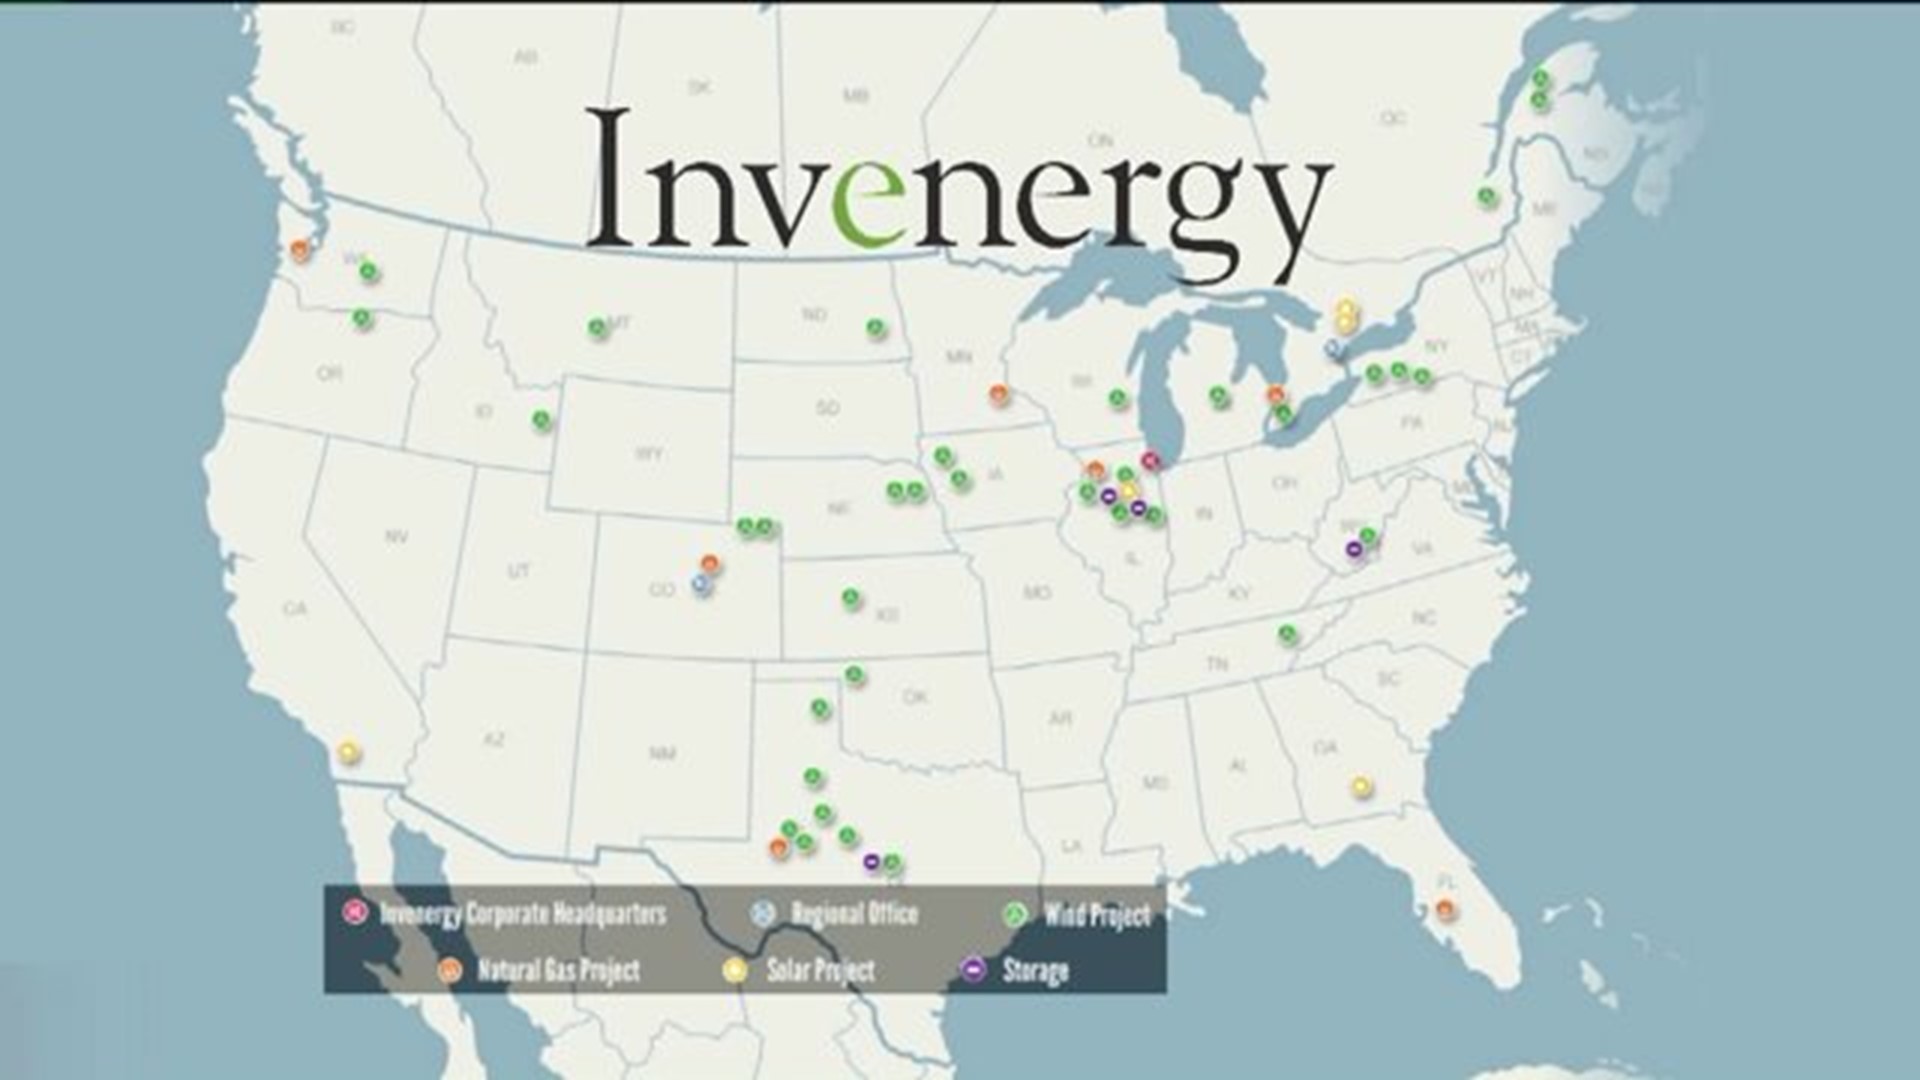 Action 16: Is Invenergy a Good Neighbor?